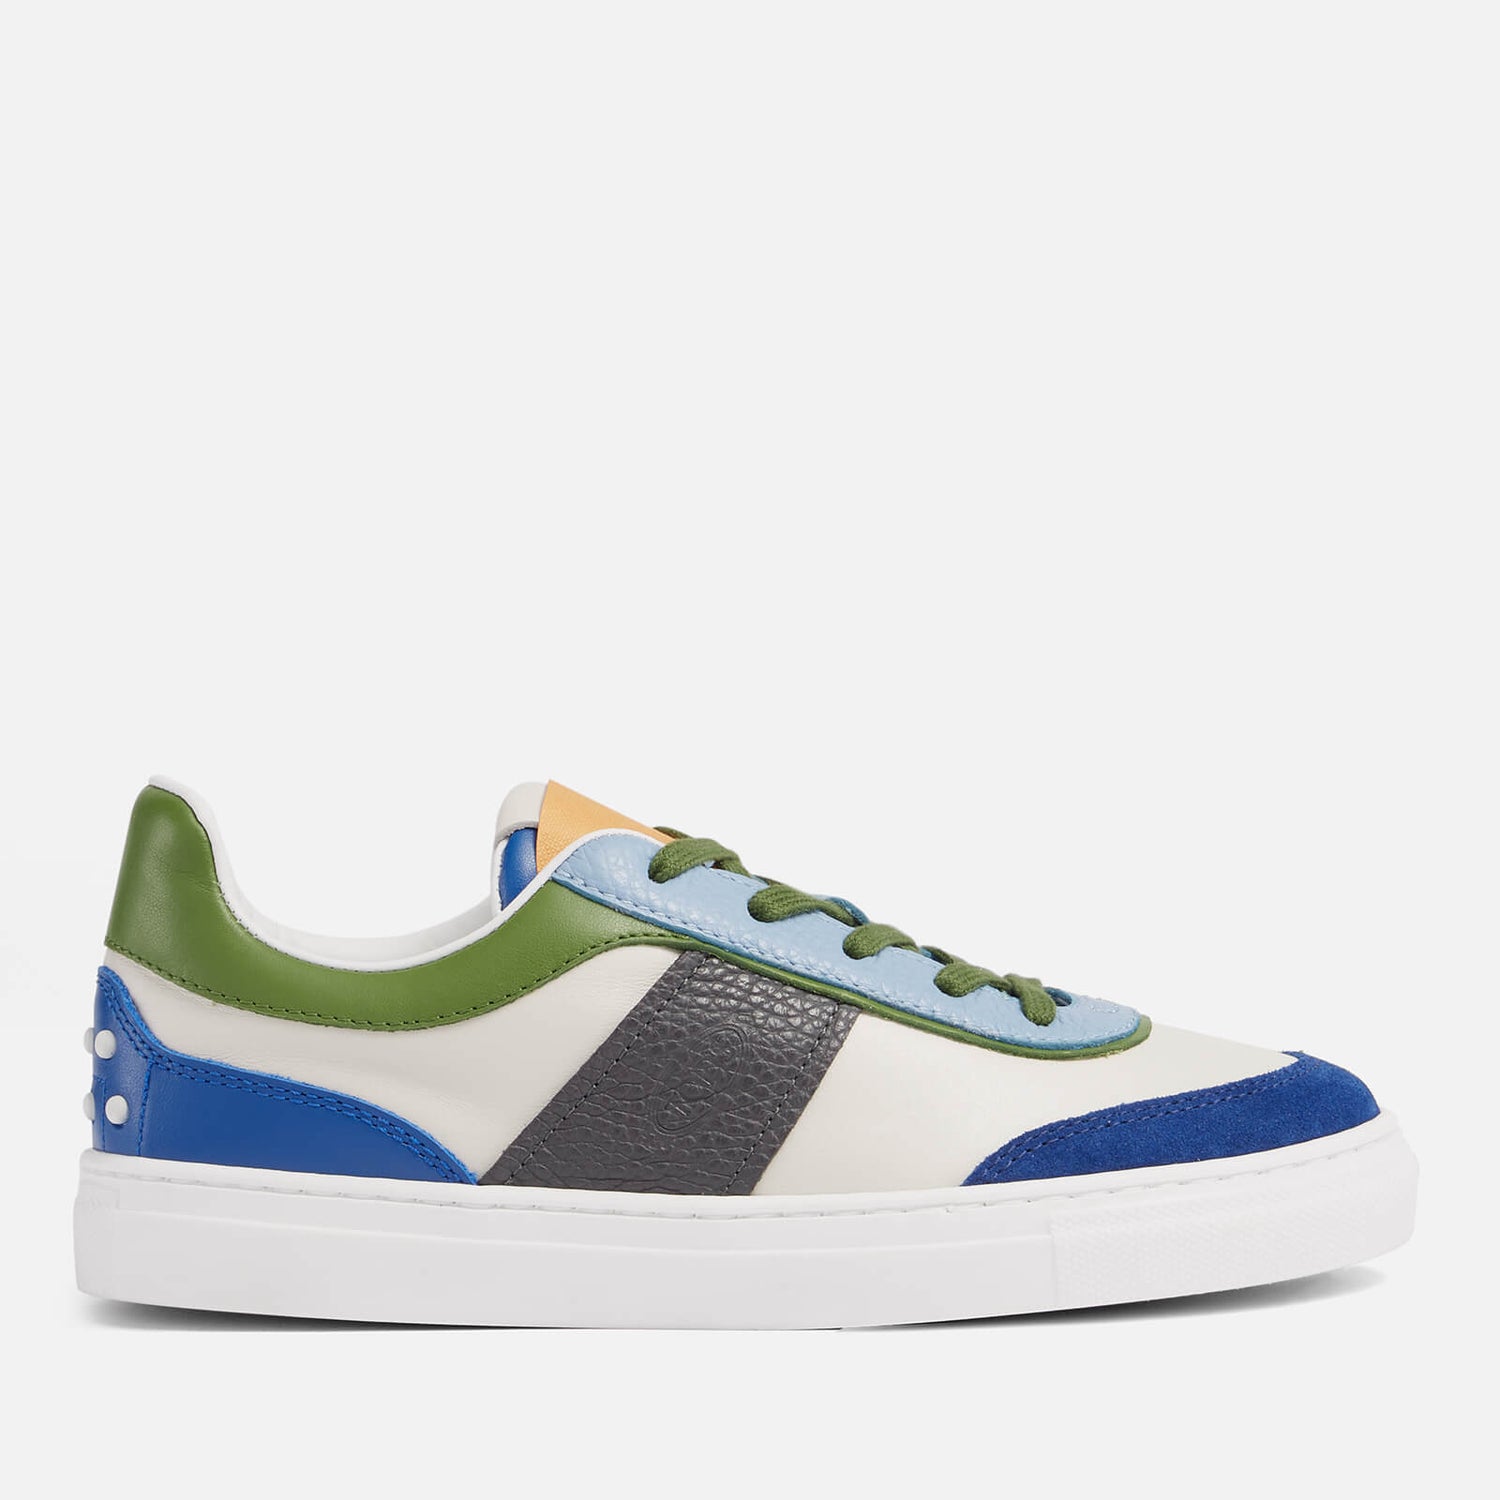 Tods Kids' Lace Up Trainers - Multi